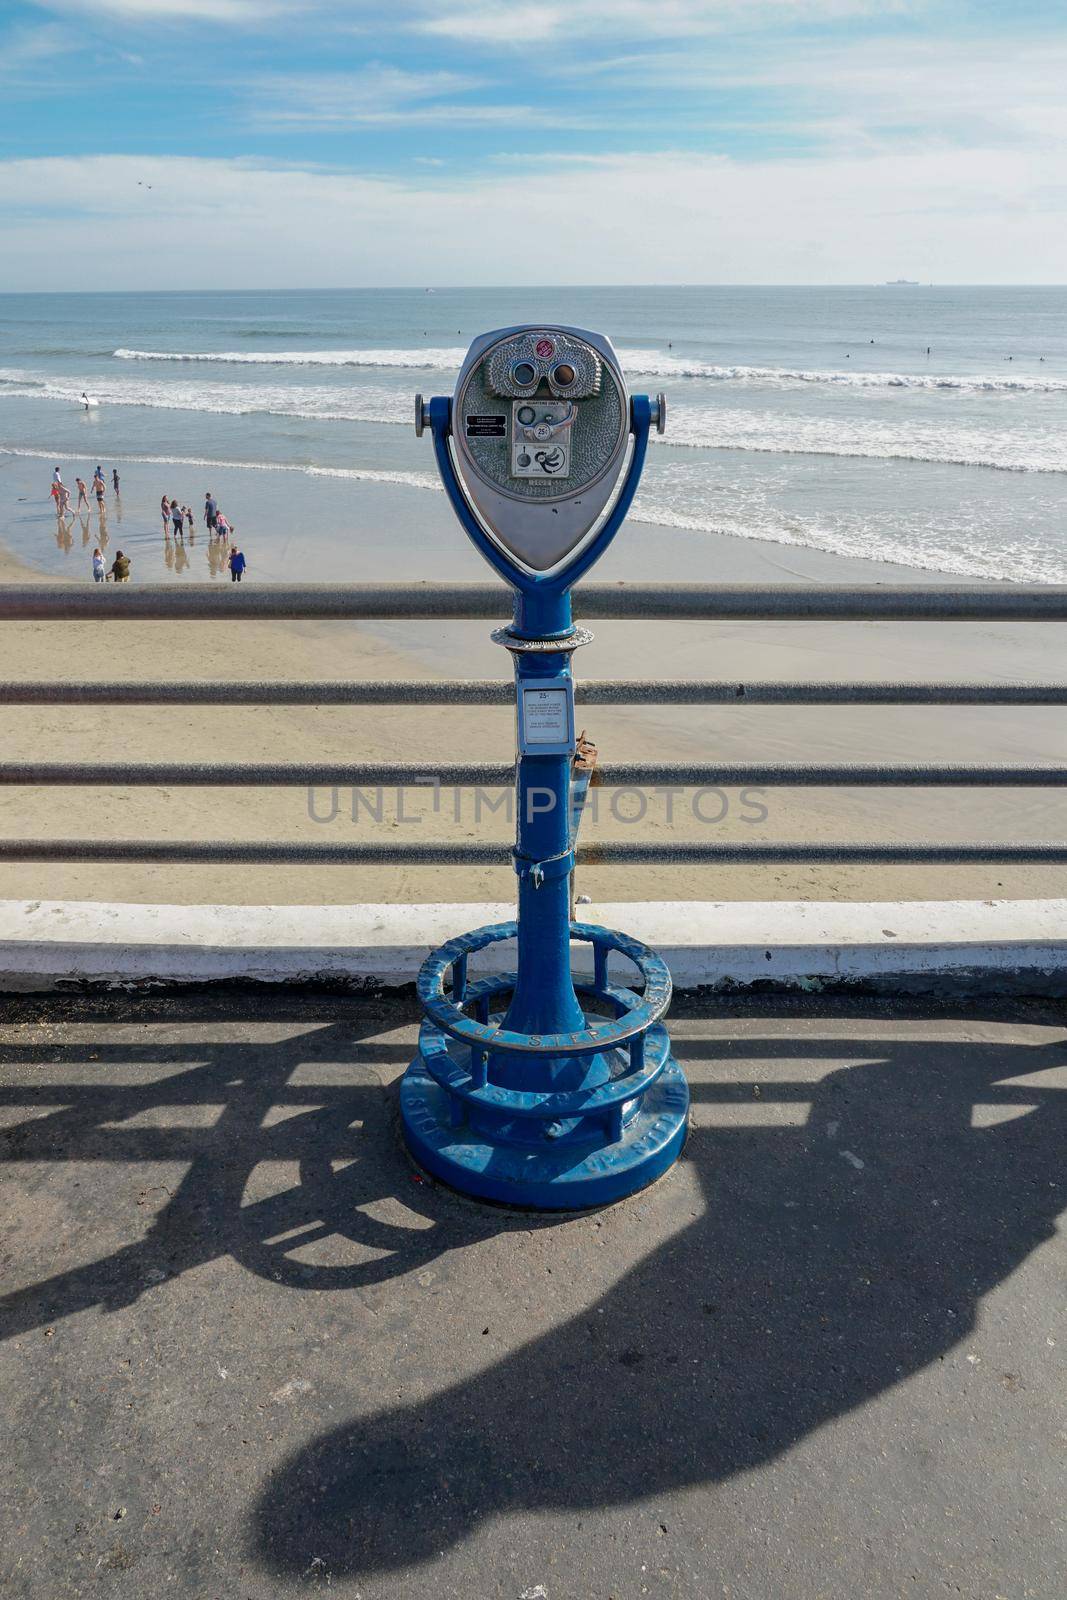 Sightseeing retro style binoculars with beach background Oceanside Pier in San Diego, California, USA. Famous travel destination in the South West Coast. January 2nd, 2021